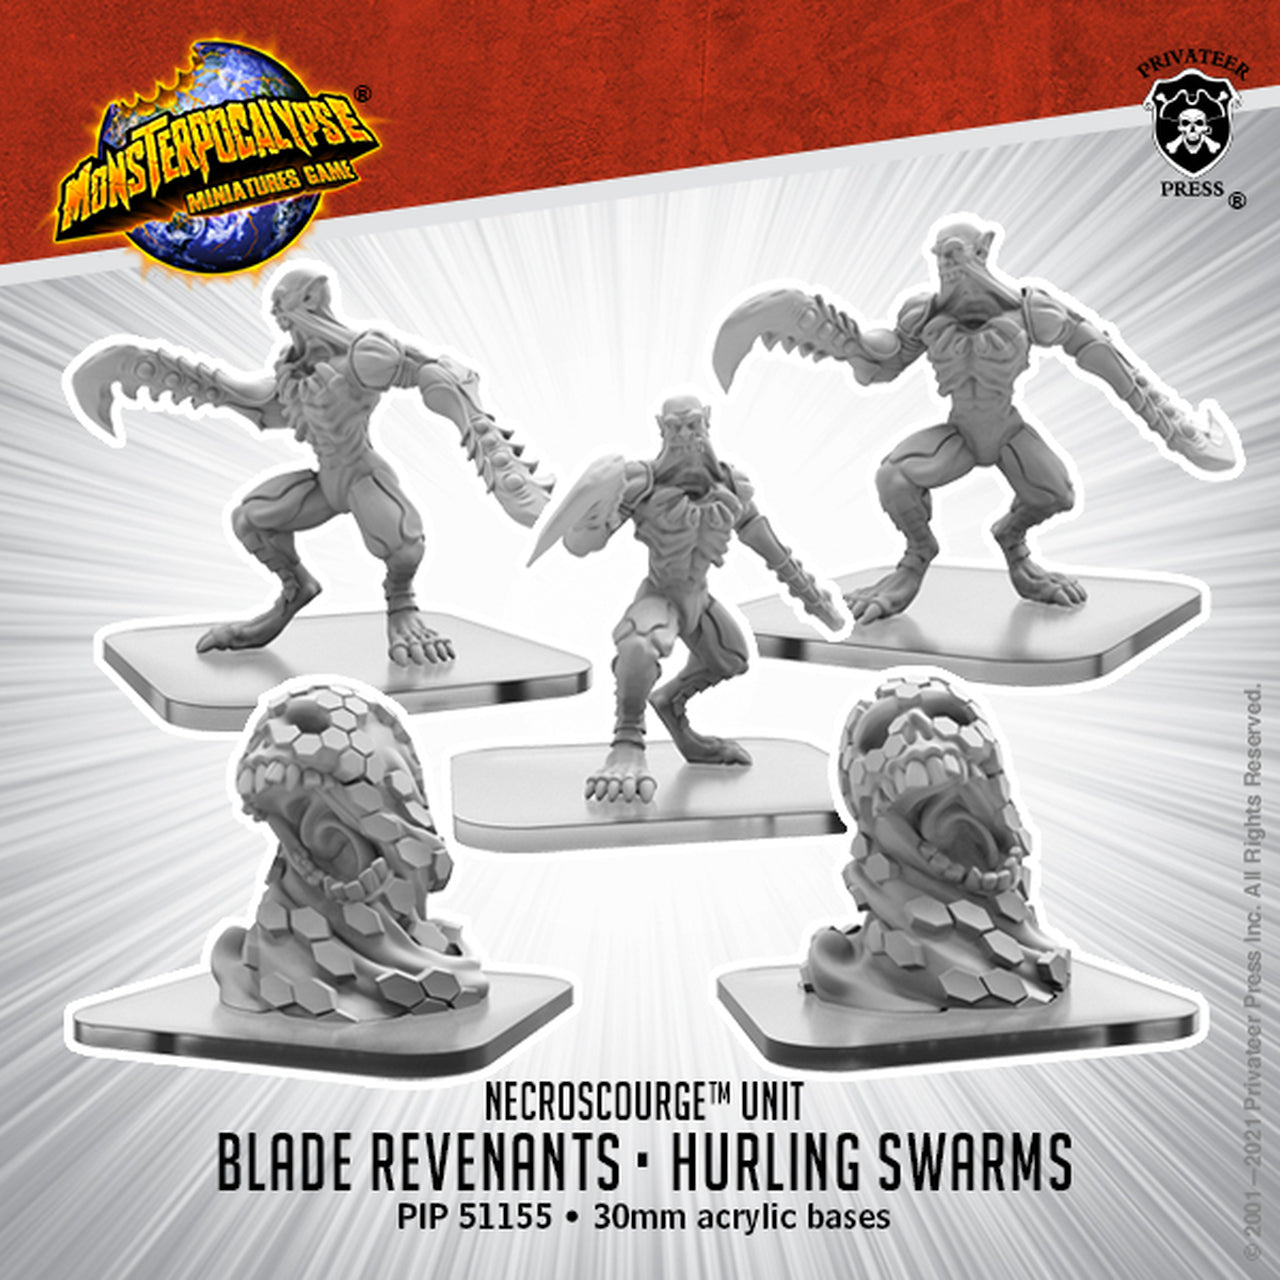 Monsterpocalypse - Necroscourge Unit: Blade Revenants and Hurling Swarms - Bards & Cards